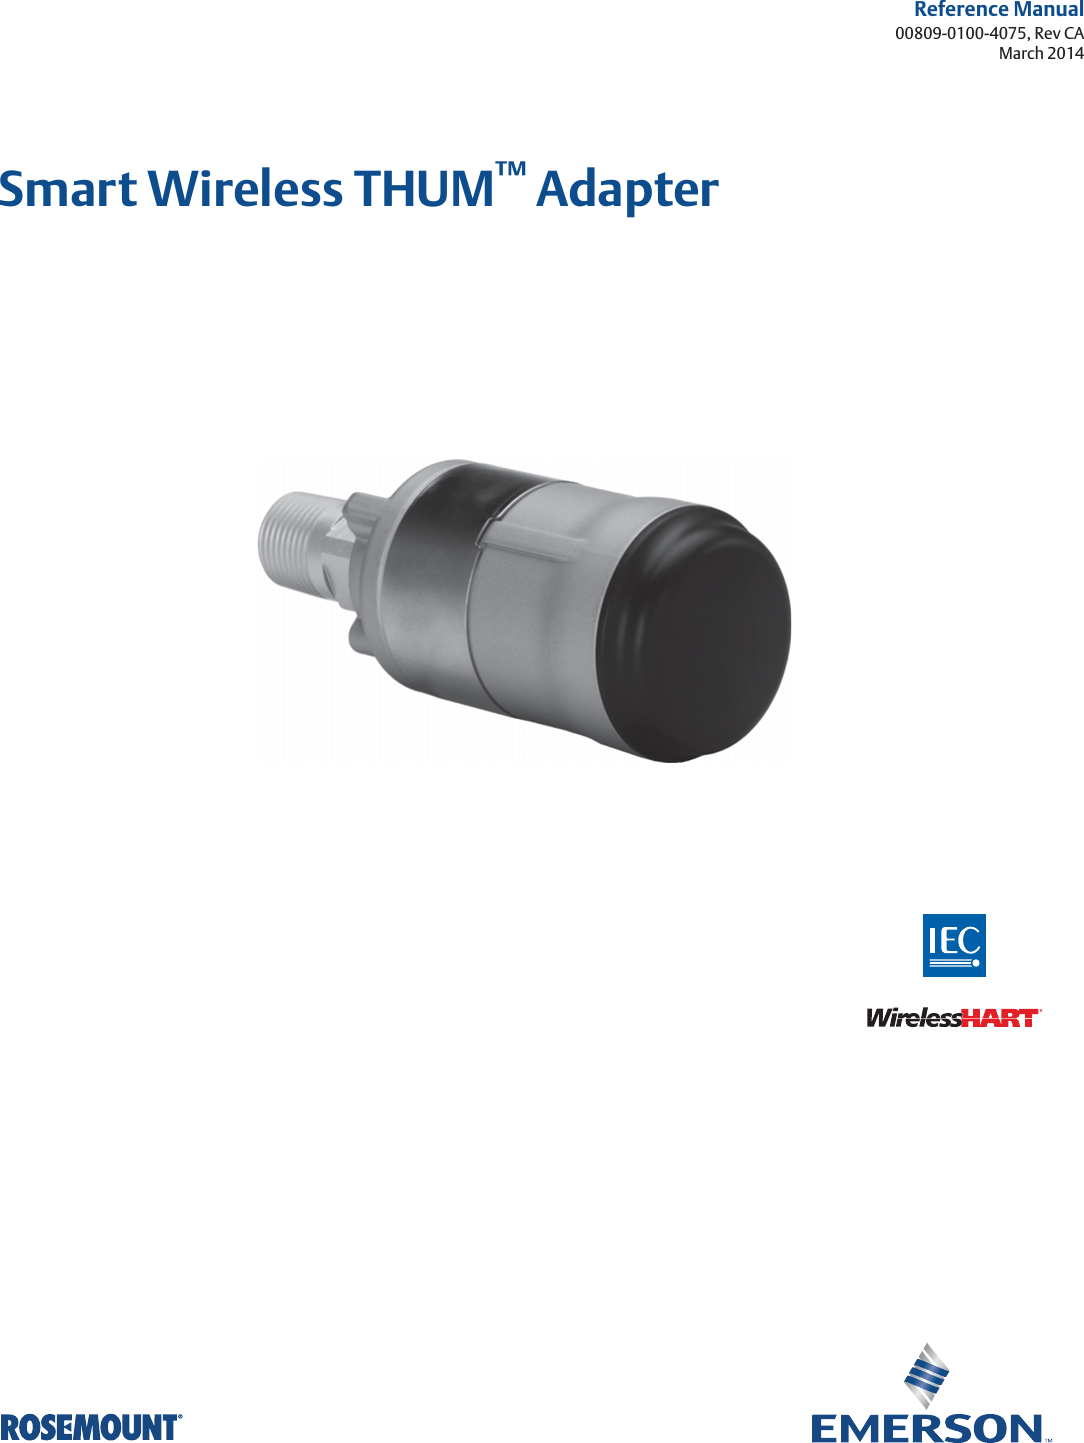 Reference Manual00809-0100-4075, Rev CAMarch 2014Smart Wireless THUM™ Adapter